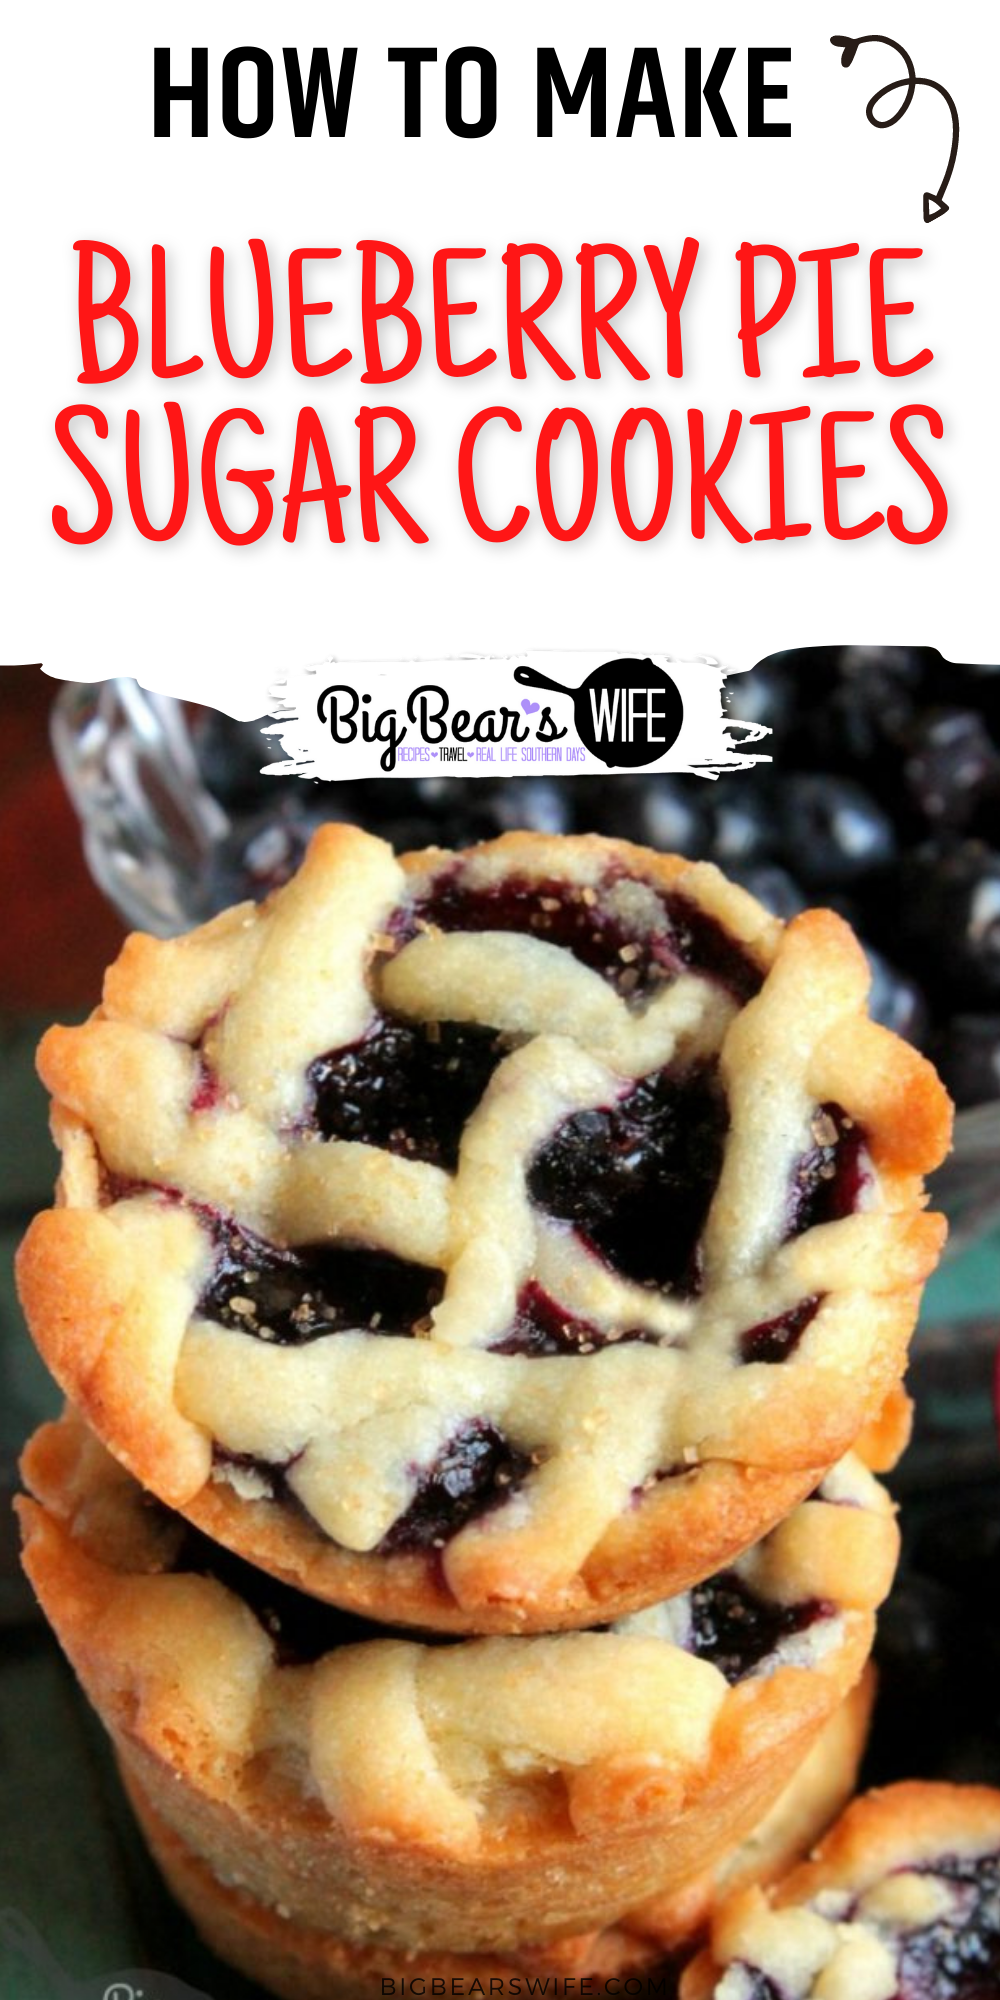 These little Blueberry Pie Sugar Cookies are filled with an amazing but easy homemade blueberry pie filling! While they look like mini pies, they're actually sugar cookies! via @bigbearswife